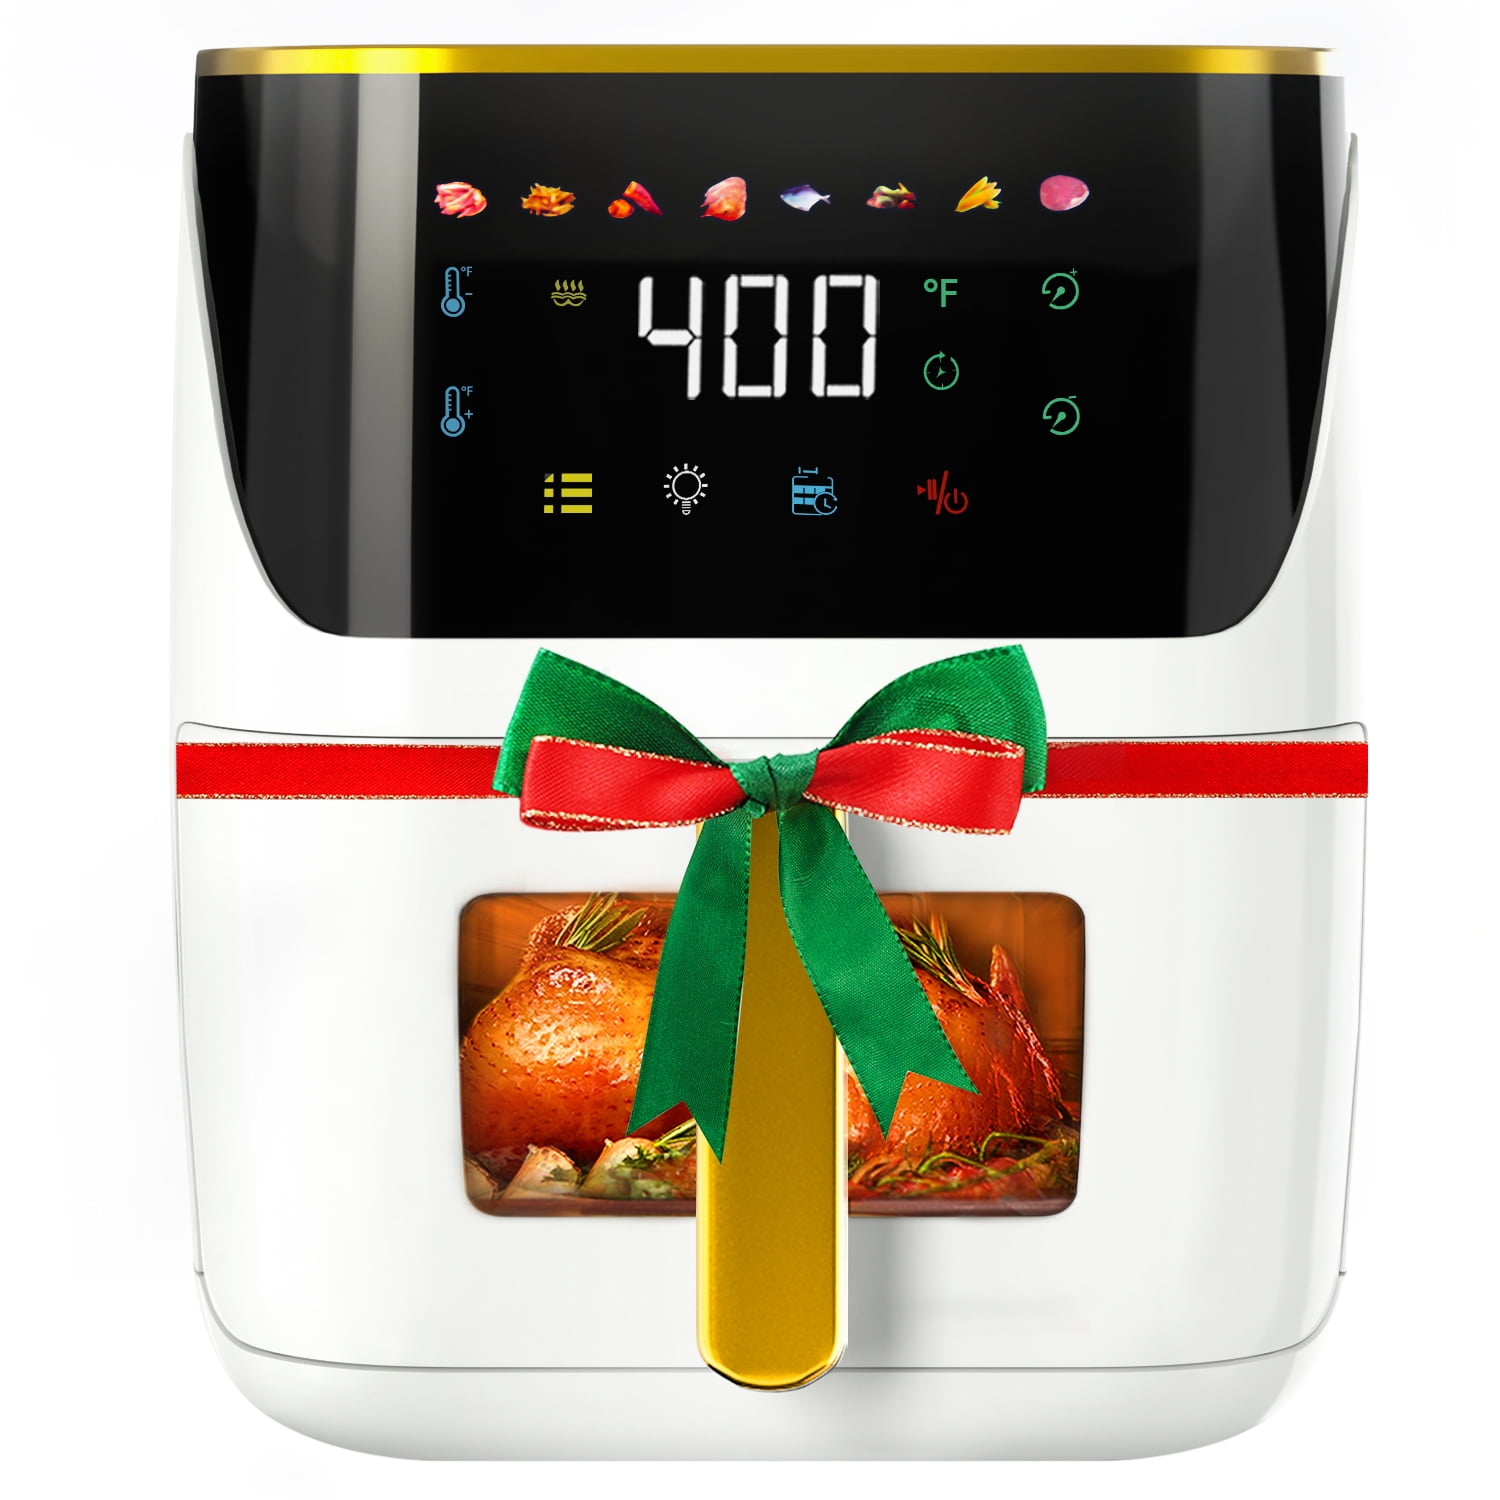 Smart 10L Air Fryer with Touch Screen and Visual Window - Large Capacity,  Oil-Free Cooking, Healthy and Delicious Results